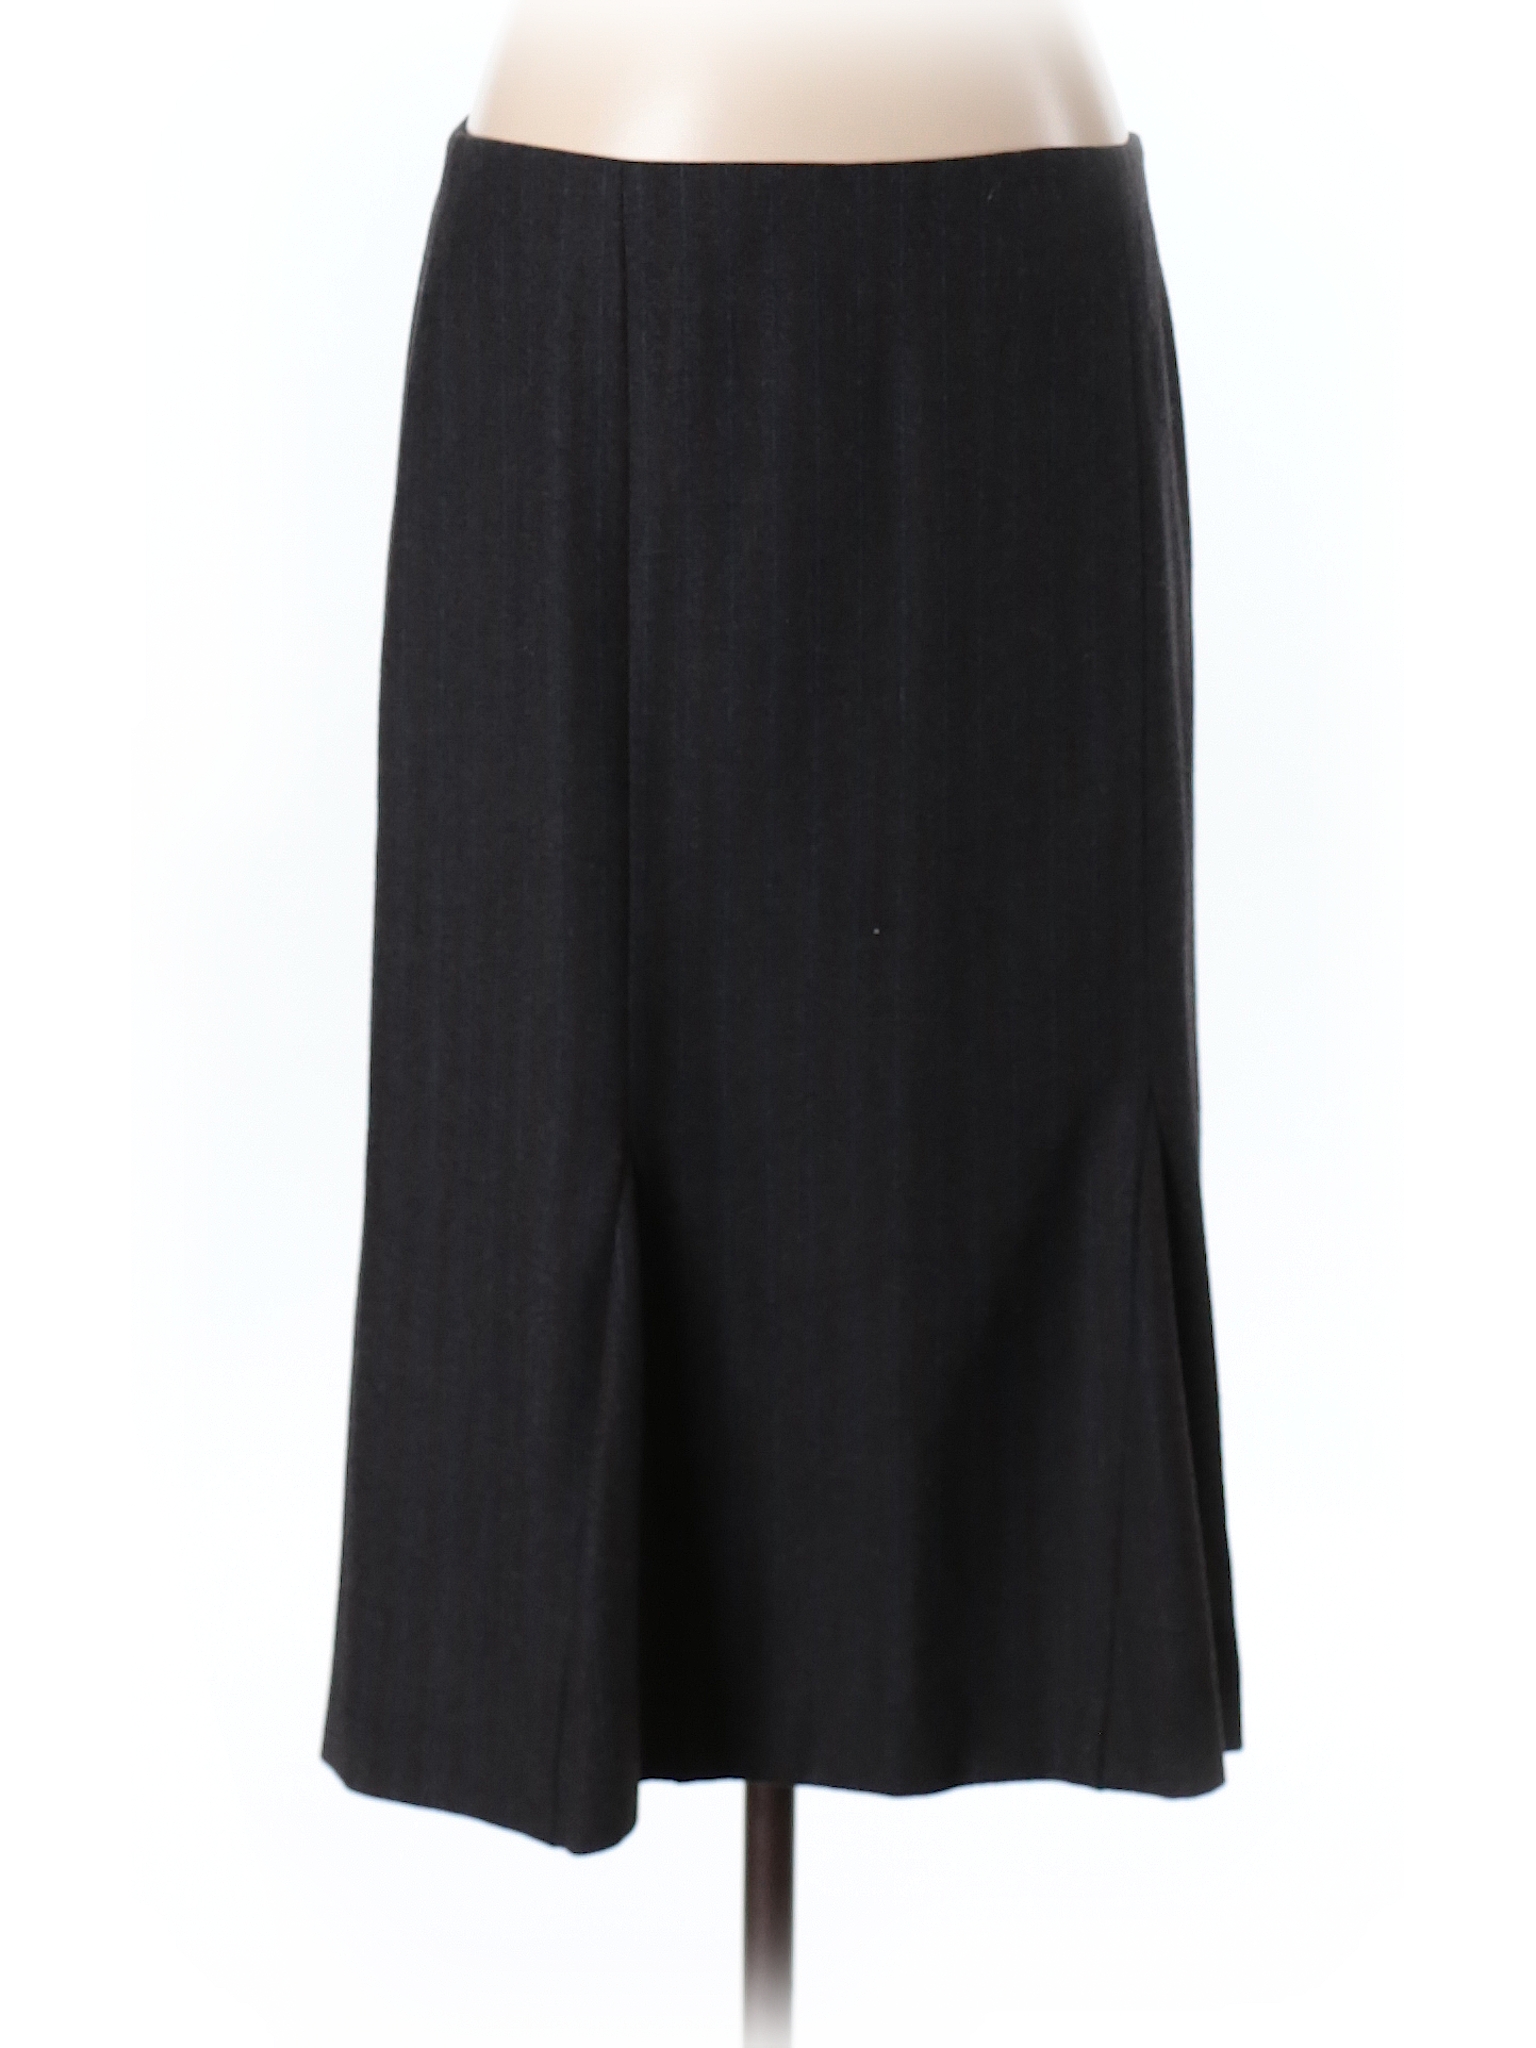 Theory Wool Skirt - 92% off only on thredUP